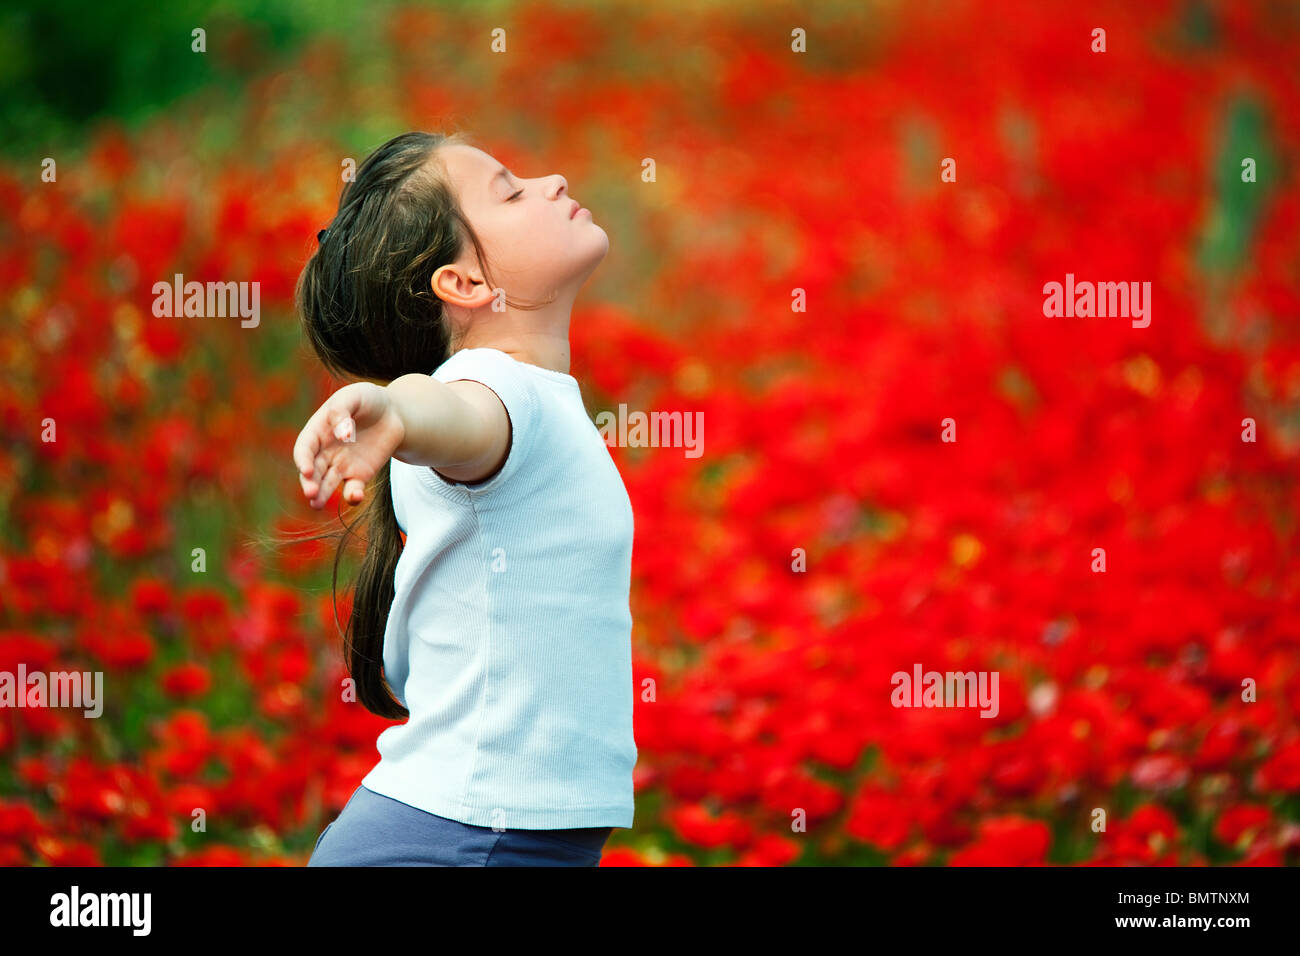 Young Girl with outstretched arms in poppy field Stock Photo